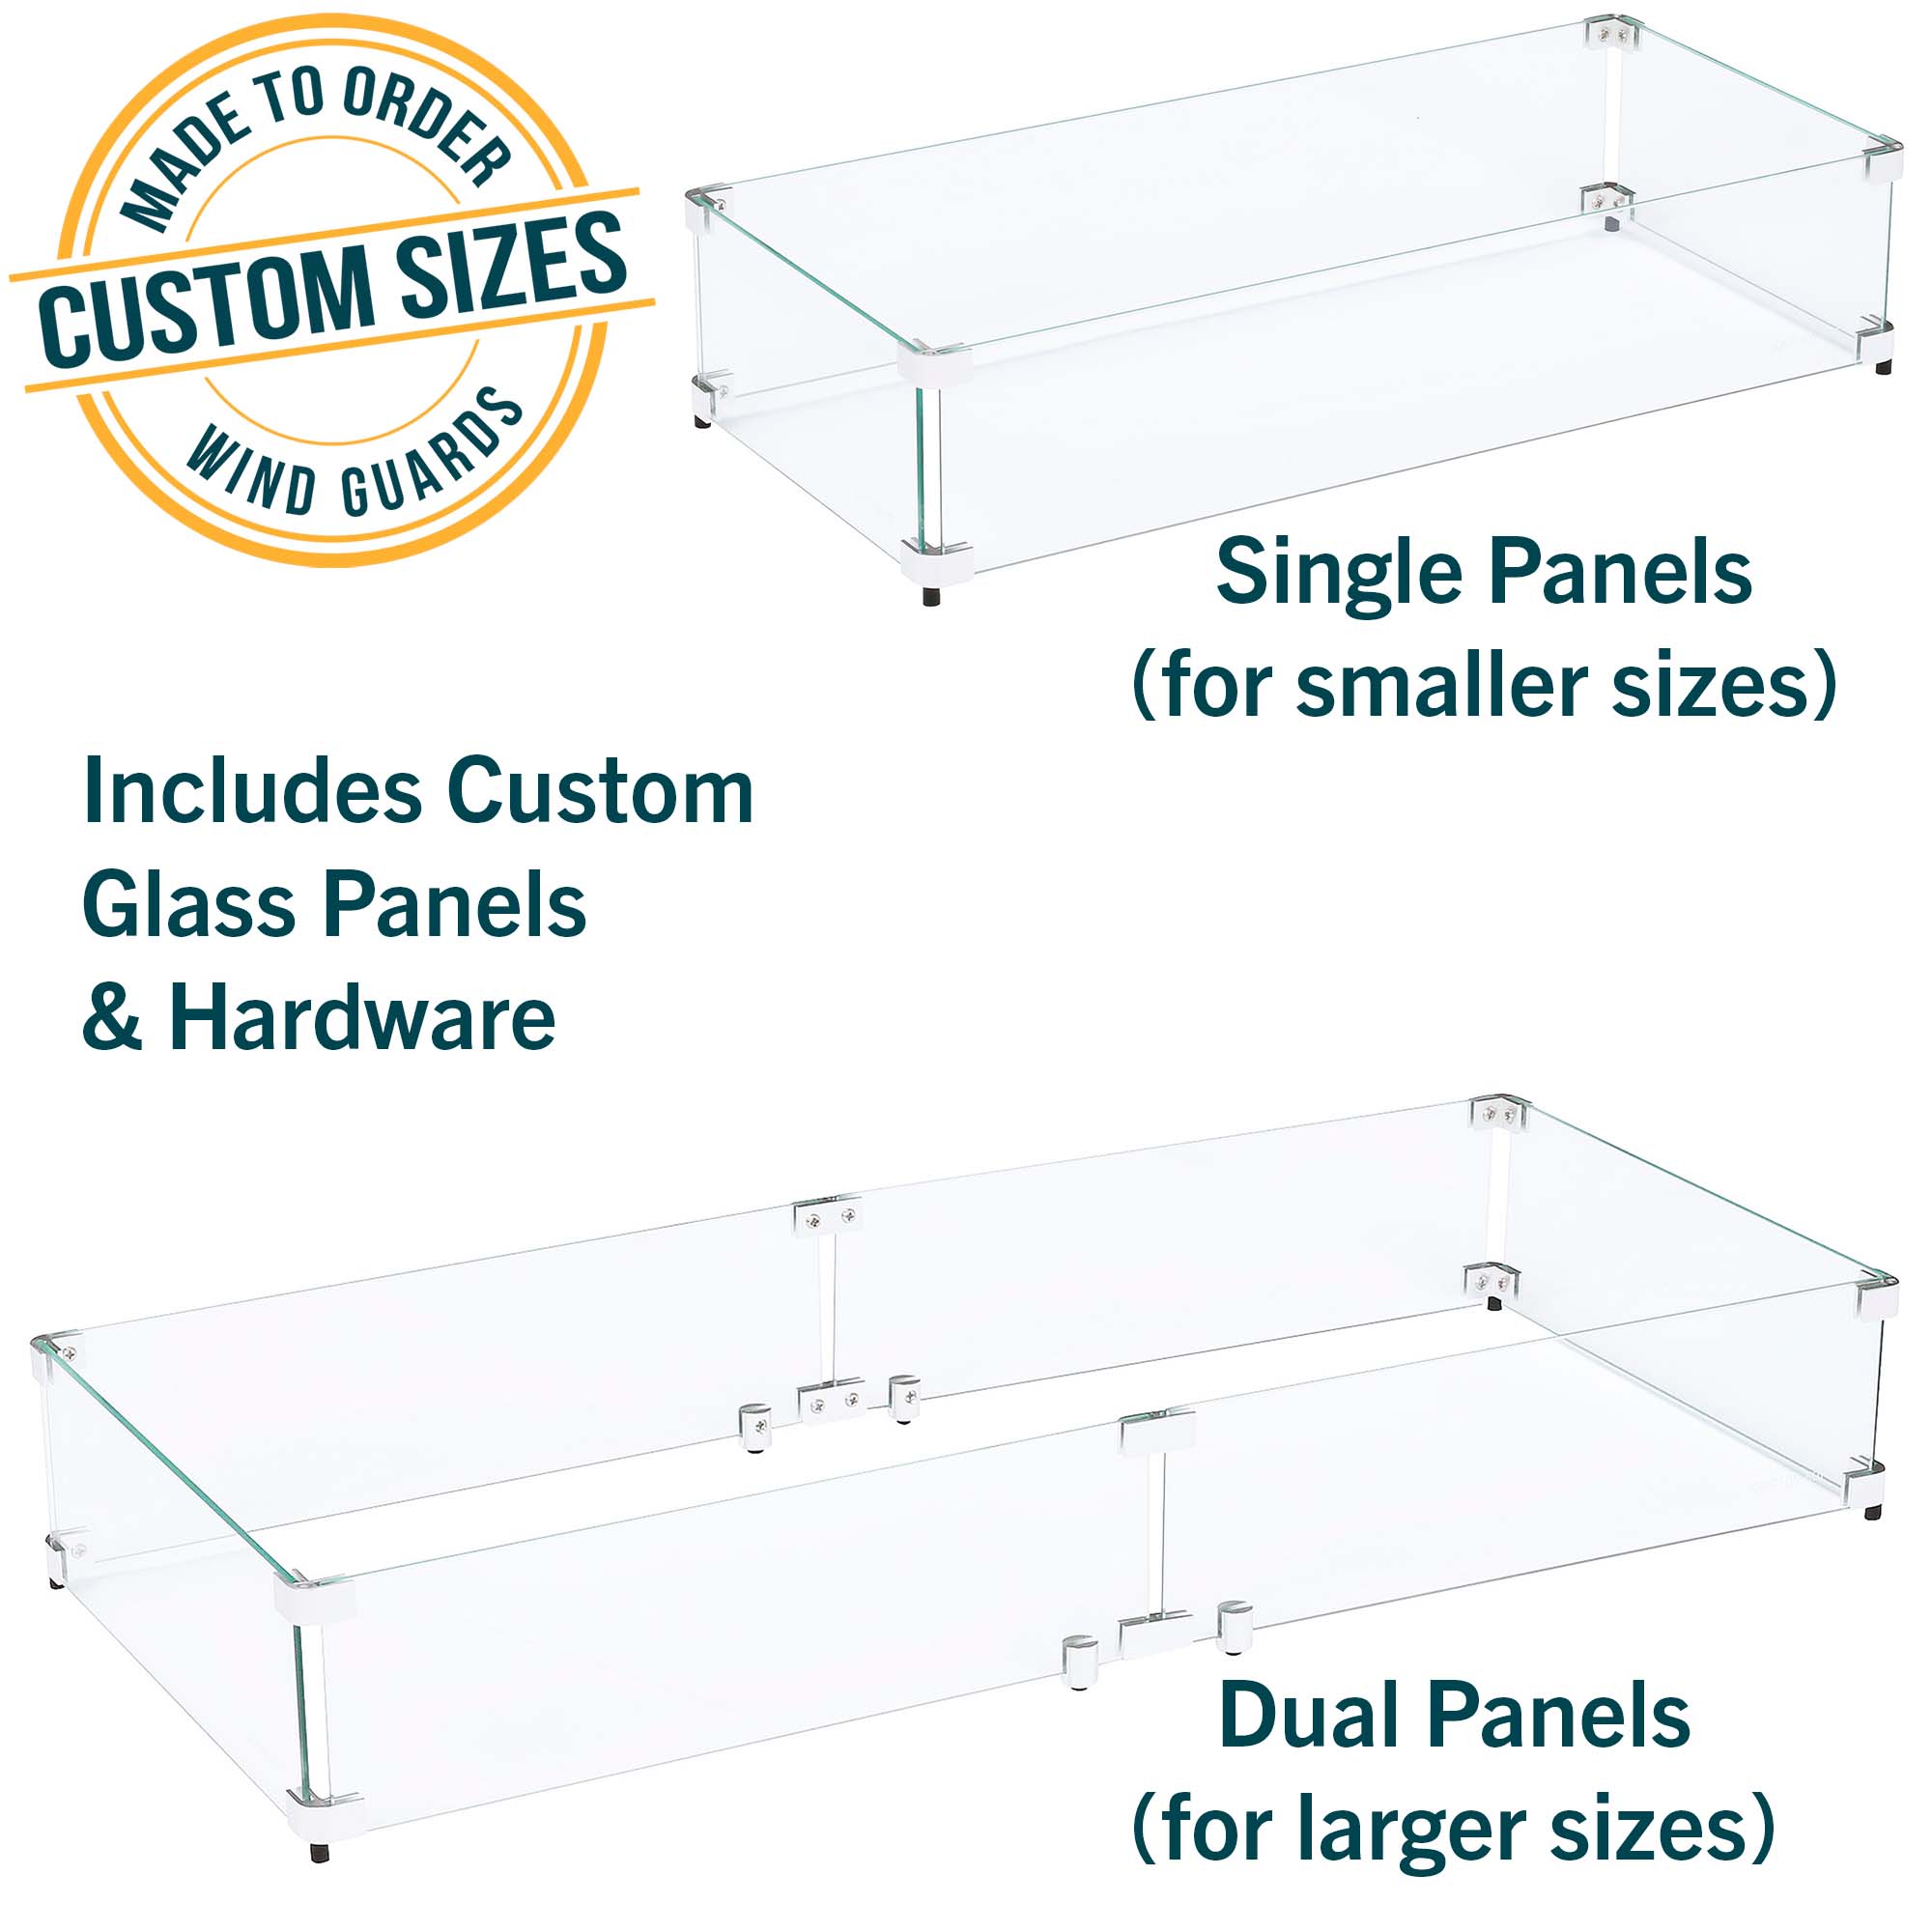 10 x 10 x 3/16 inch Tempered Glass Panel